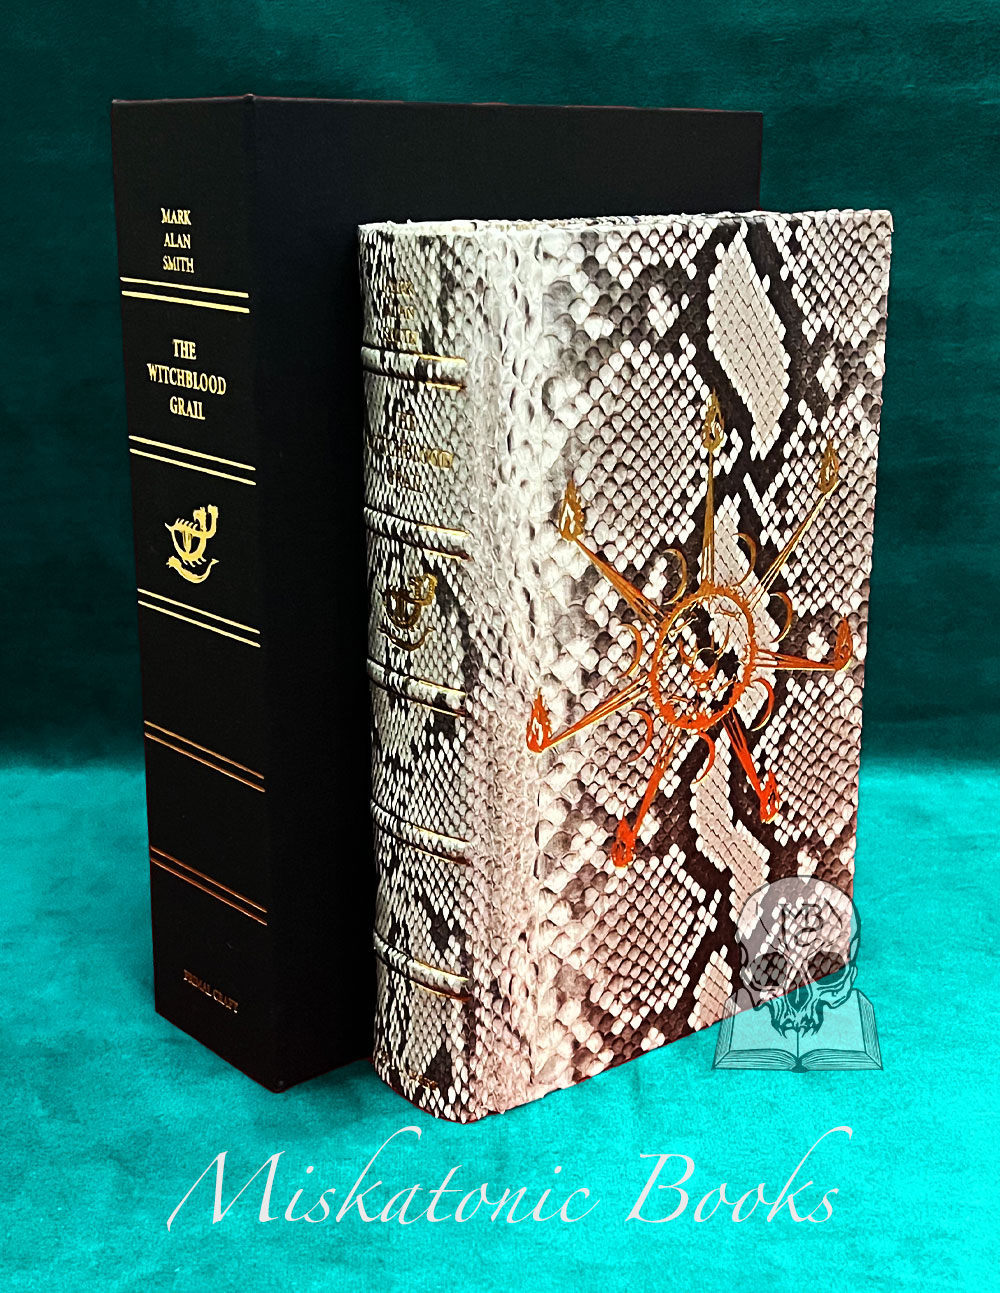 THE WITCHBLOOD GRAIL: The Second Volume in the Trilogy, The Way of Sacrifice by Mark Alan Smith (Signed, Inscribed and Sigilised, Bound in White Python, Consecrated Deluxe Edition) 